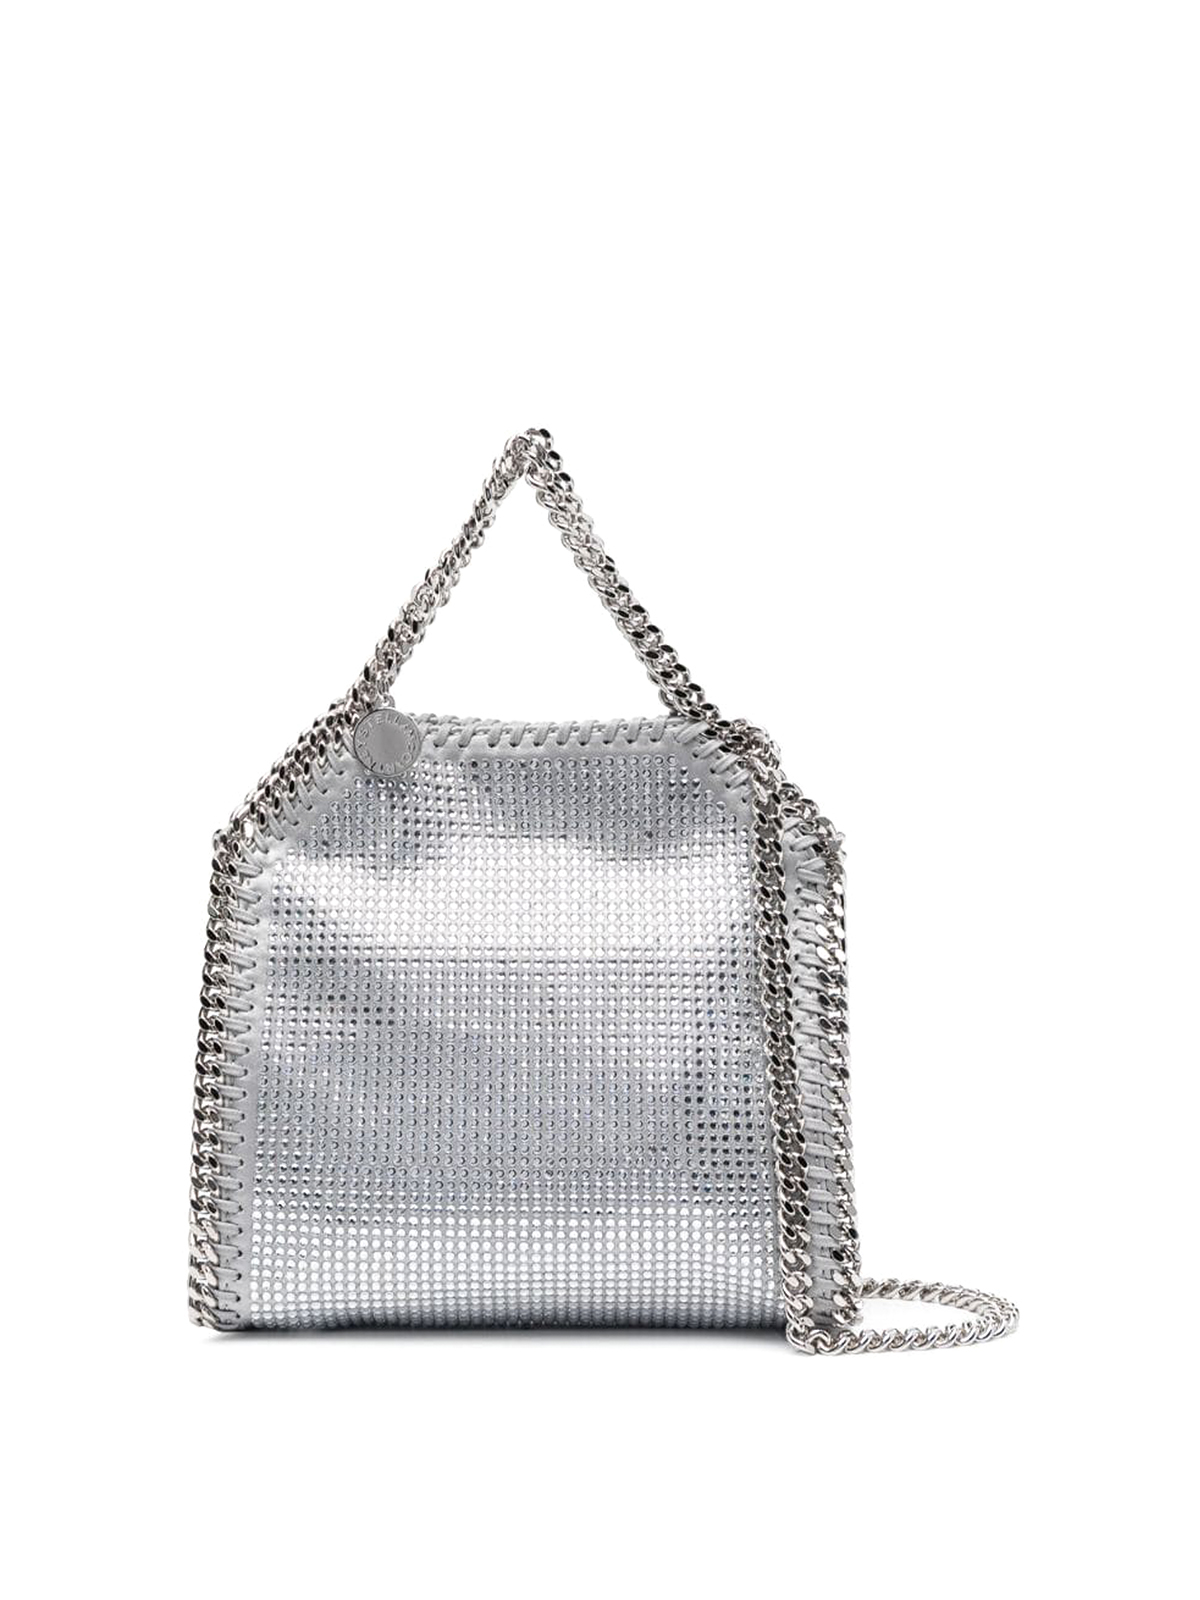 Stella Mccartney Falabella Tiny All Over Crystal Tote Bag In Silver